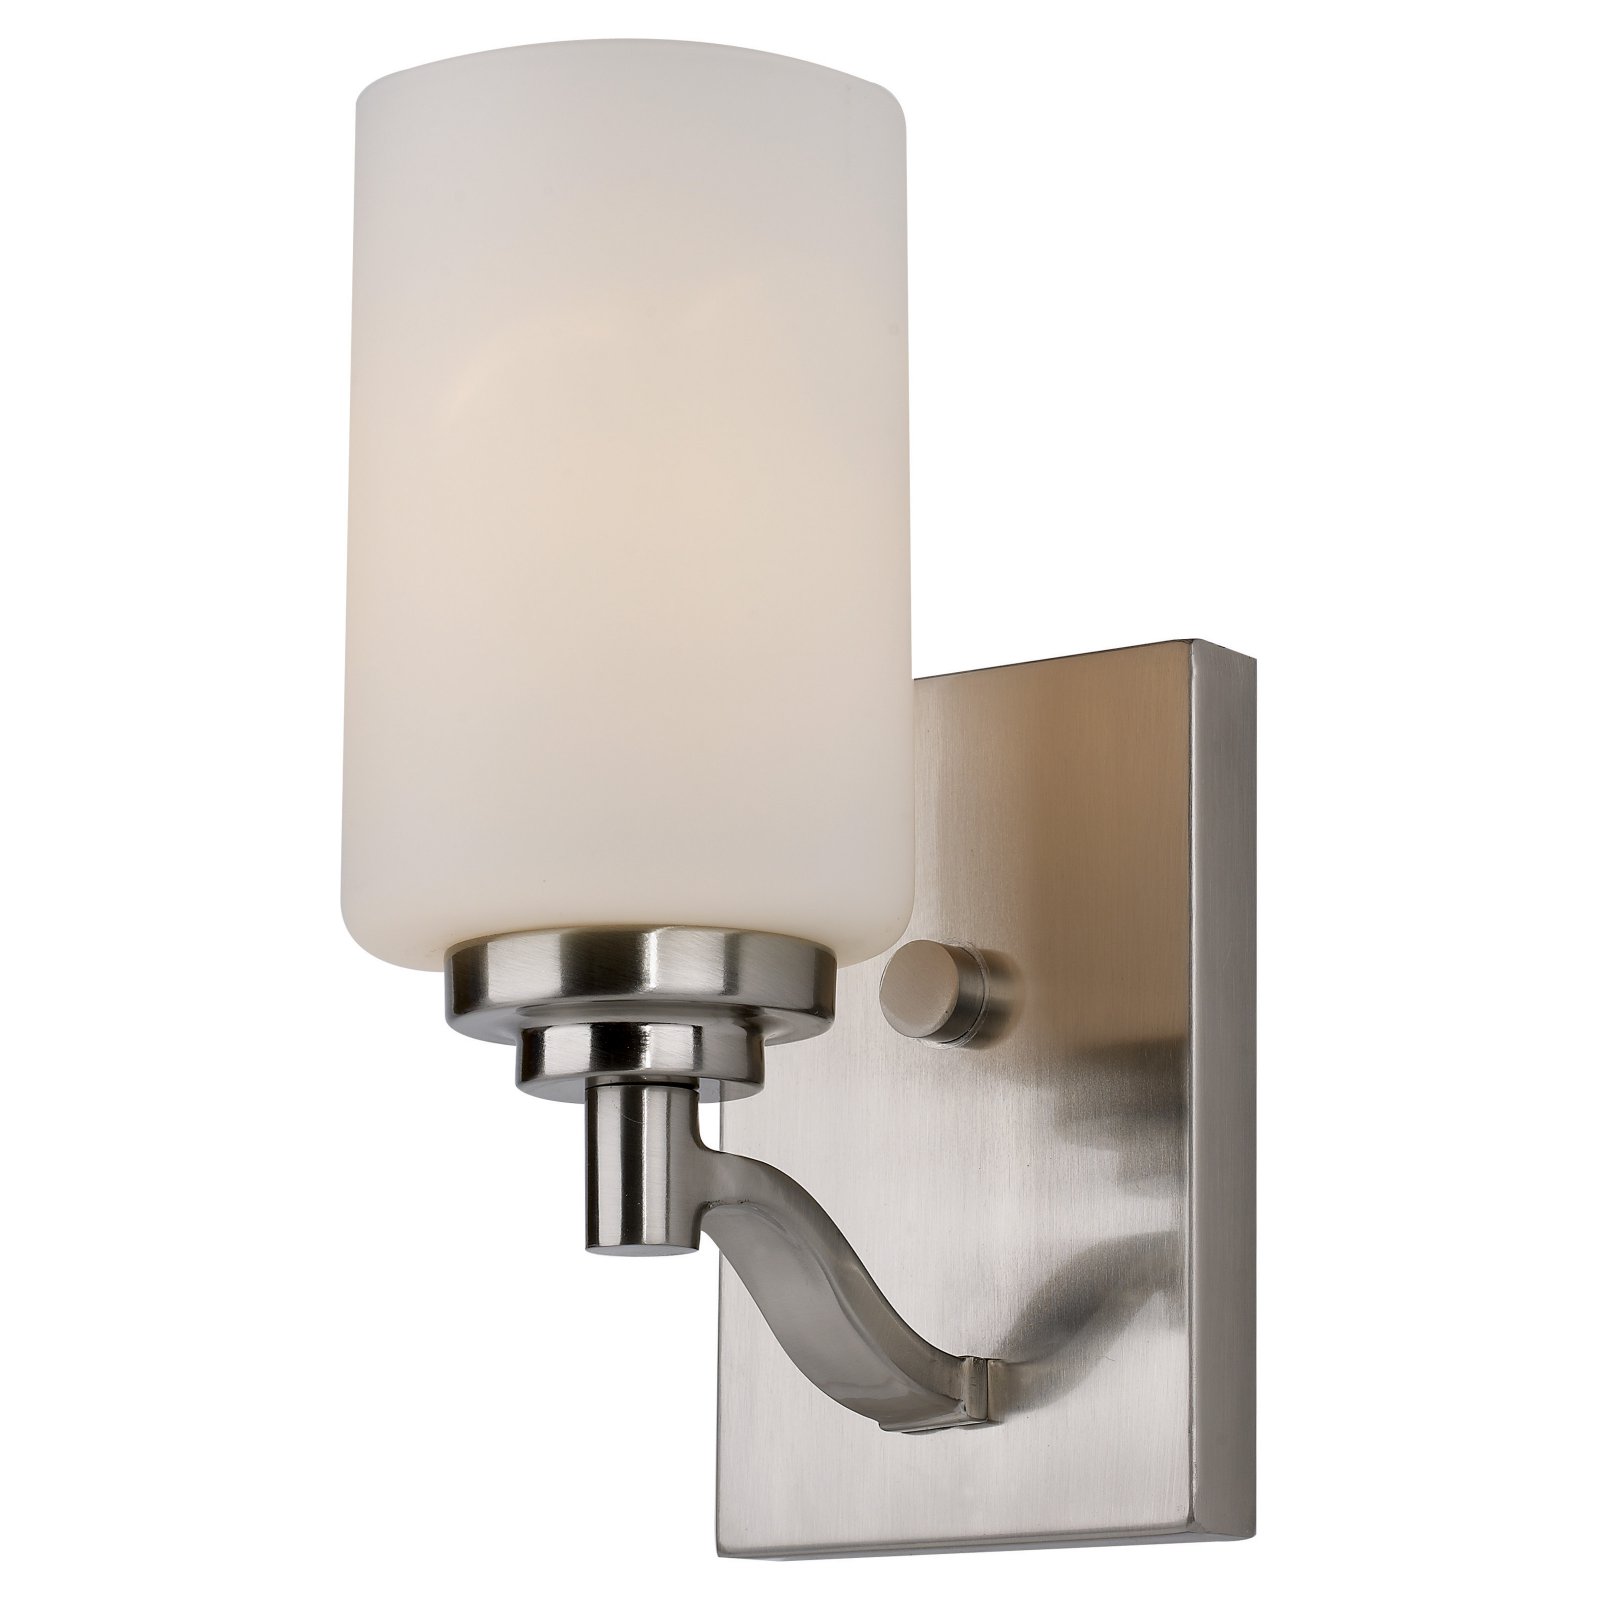 70521 BN-Trans Globe Lighting-Mod Space - One Light Wall Sconce-Brushed Nickel Finish - image 2 of 2